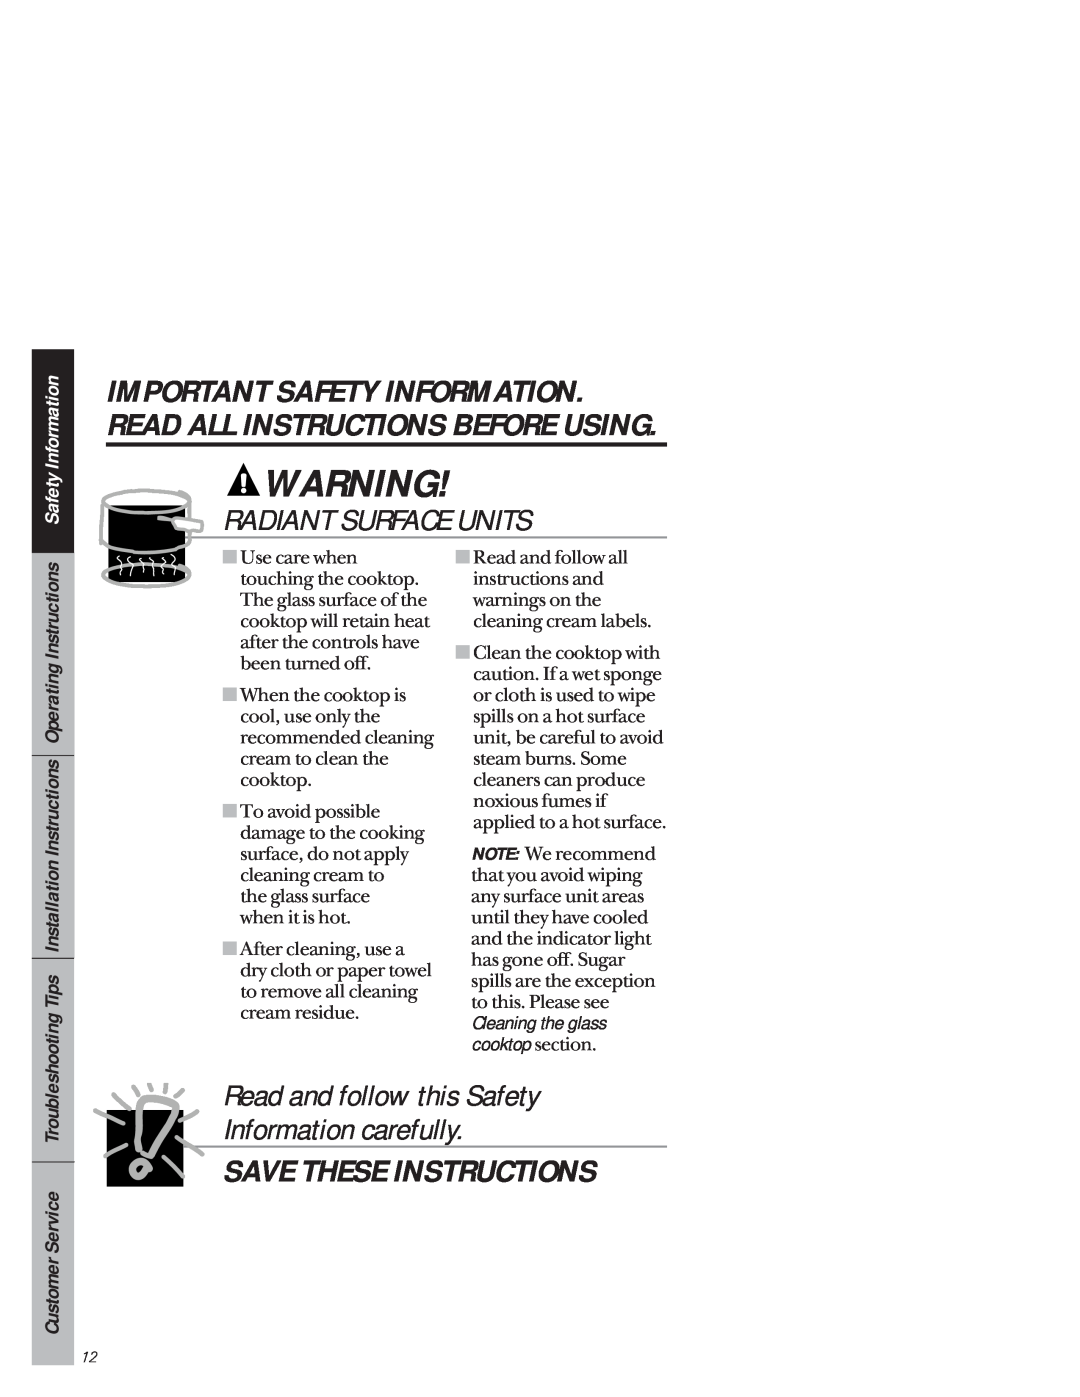 GE 49-8941 Read and follow this Safety Information carefully, Customer Service, Cleaning the glass cooktop section 